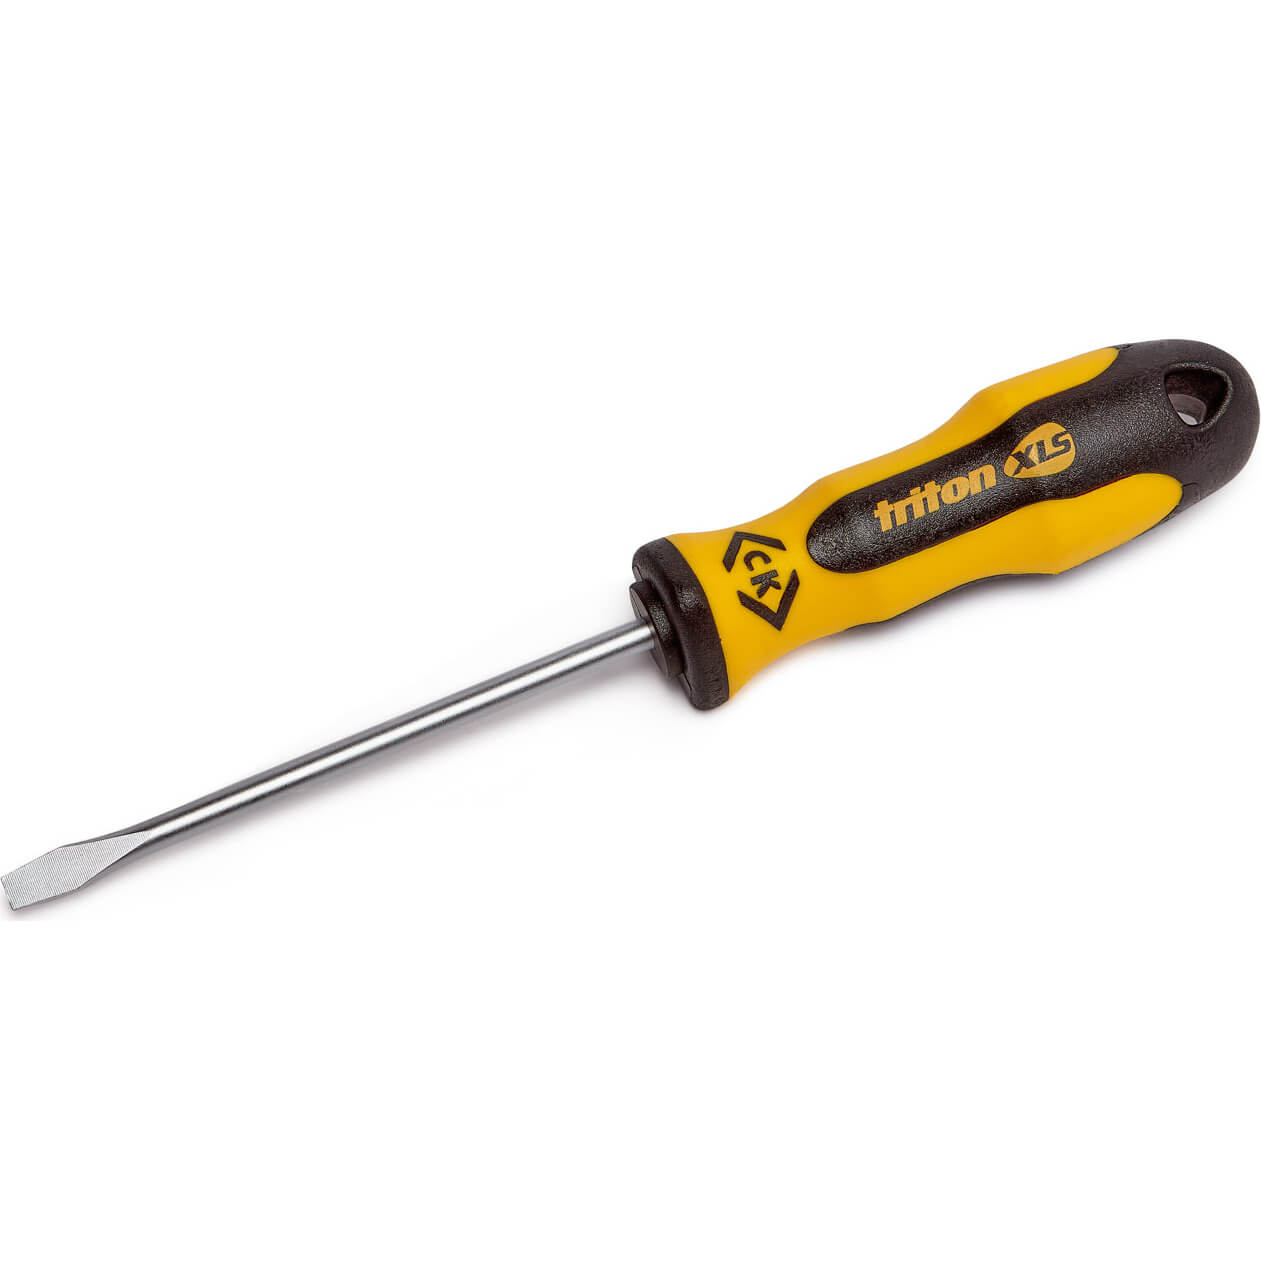 Image of CK Triton XLS Flared Slotted Screwdriver 10mm 200mm